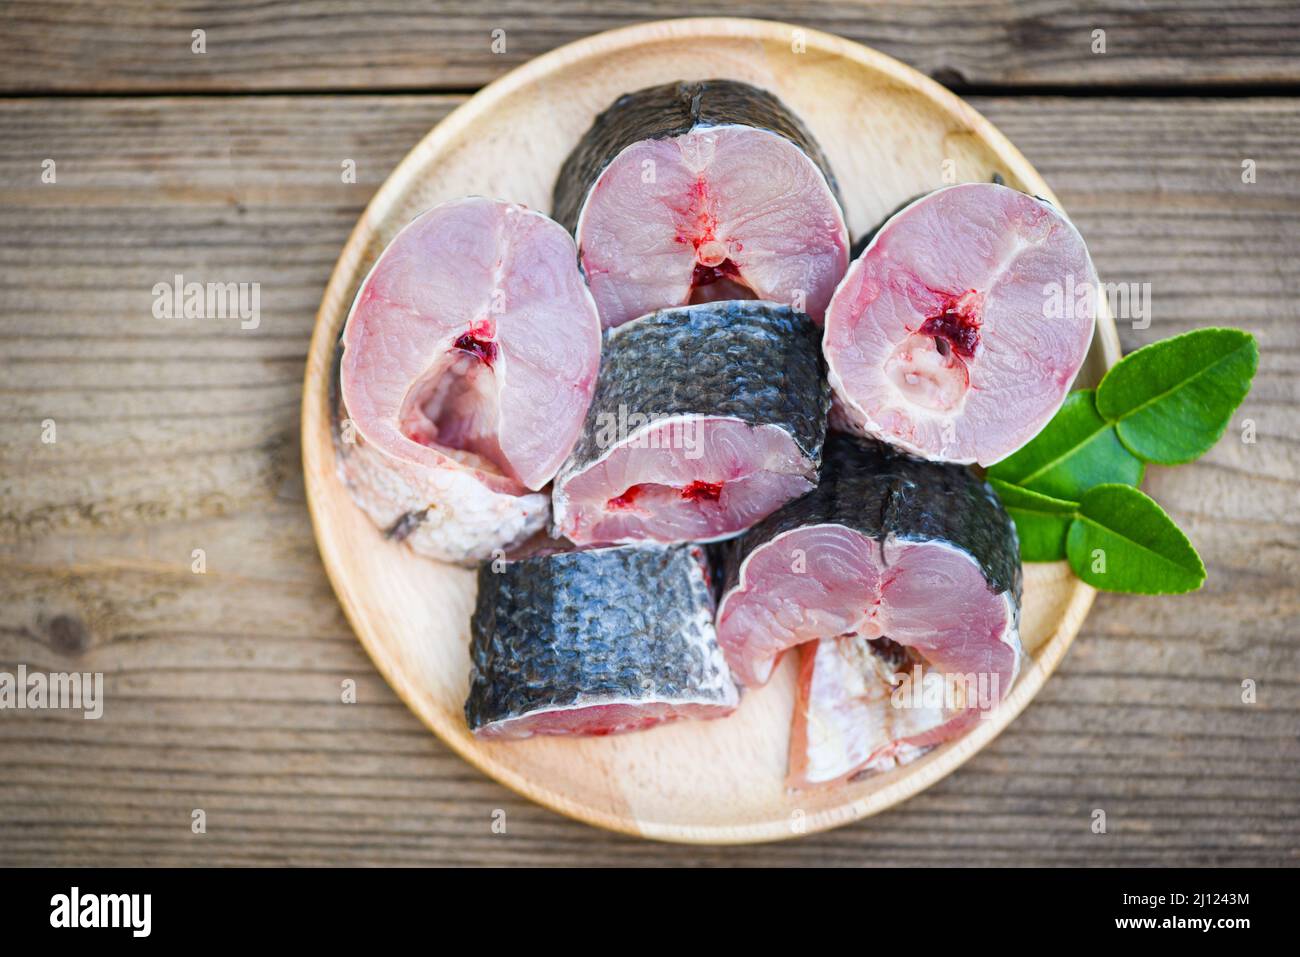 Snakehead fish for cooking food, striped snakehead fish chopped with ingredients kaffir lime leaves on plate and wooden table kitchen background, Fres Stock Photo